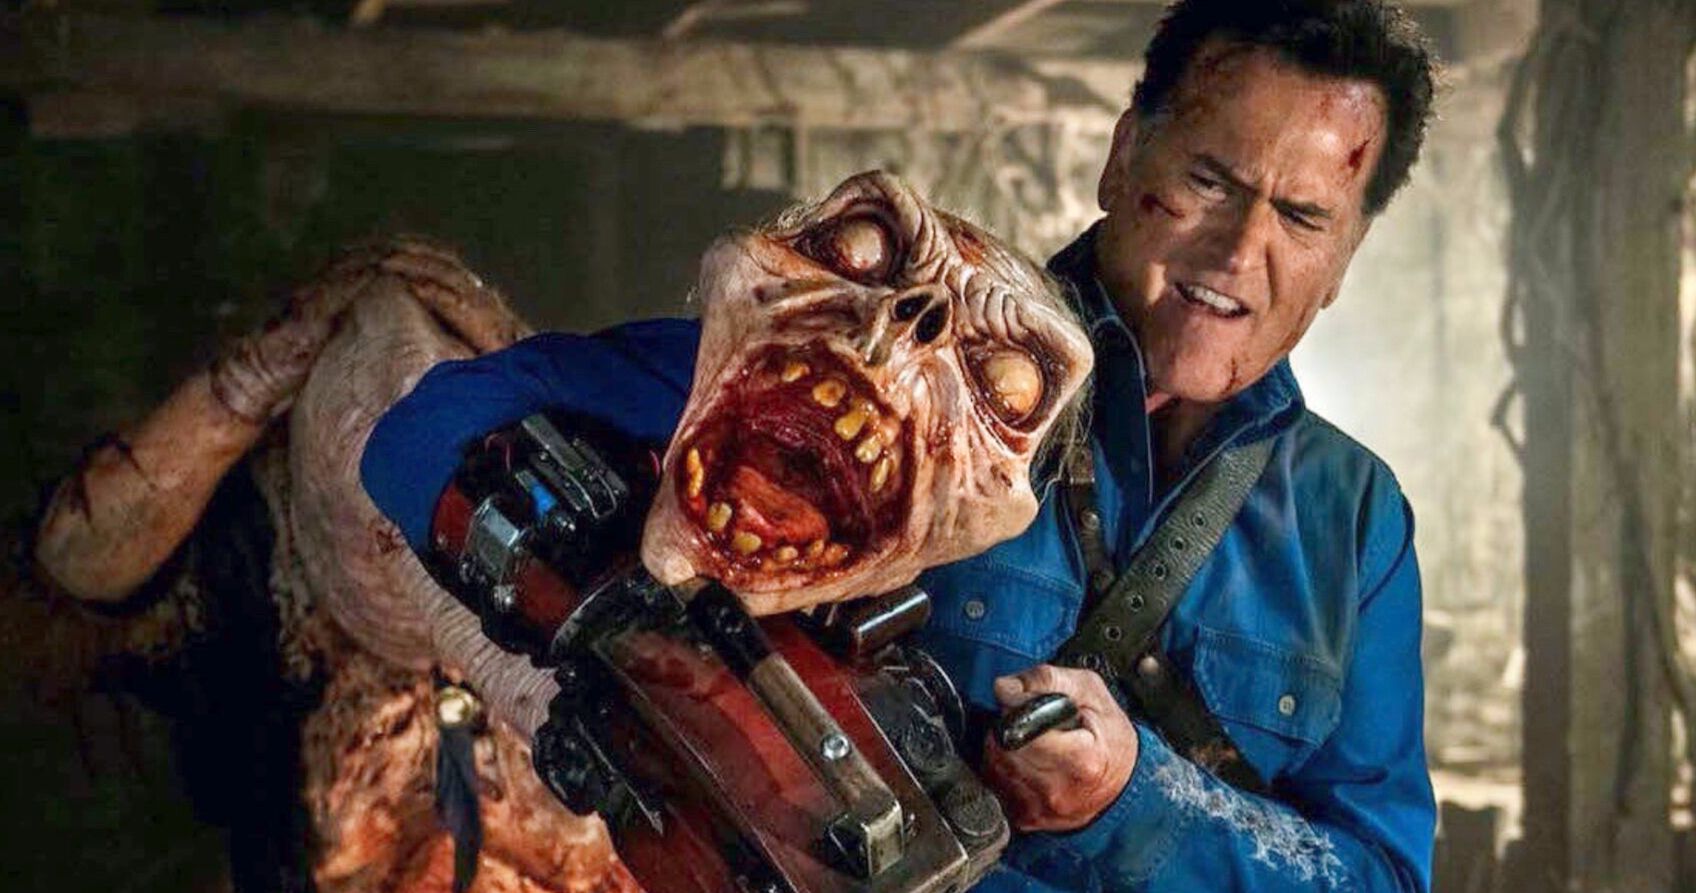 Evil Dead 4 Director, Title and Production Plans Confirmed by Bruce Campbell